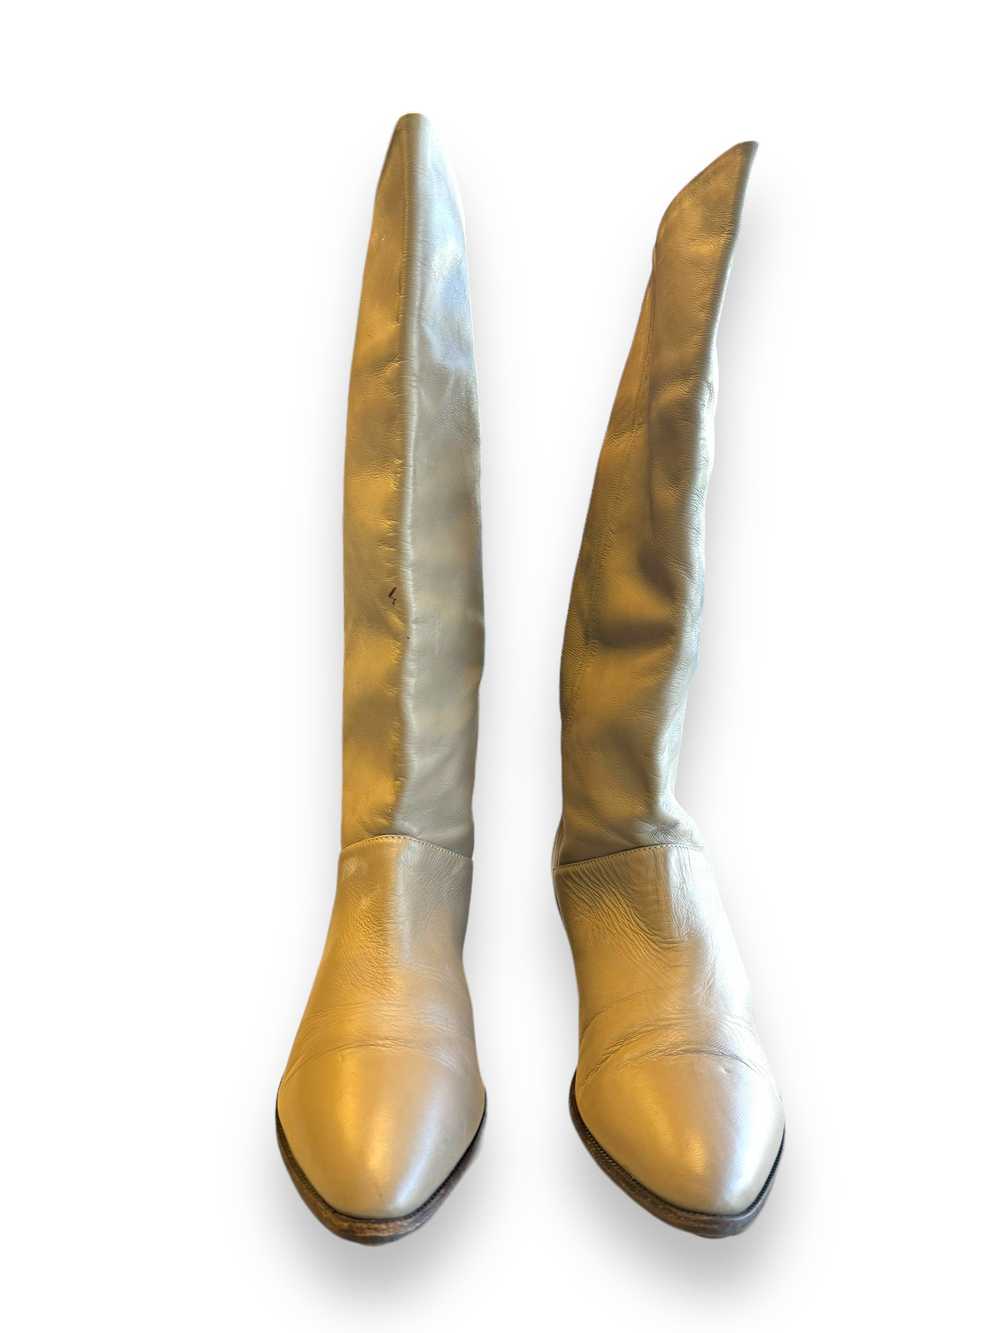 1980s Flat Beige Leather Boots - image 2